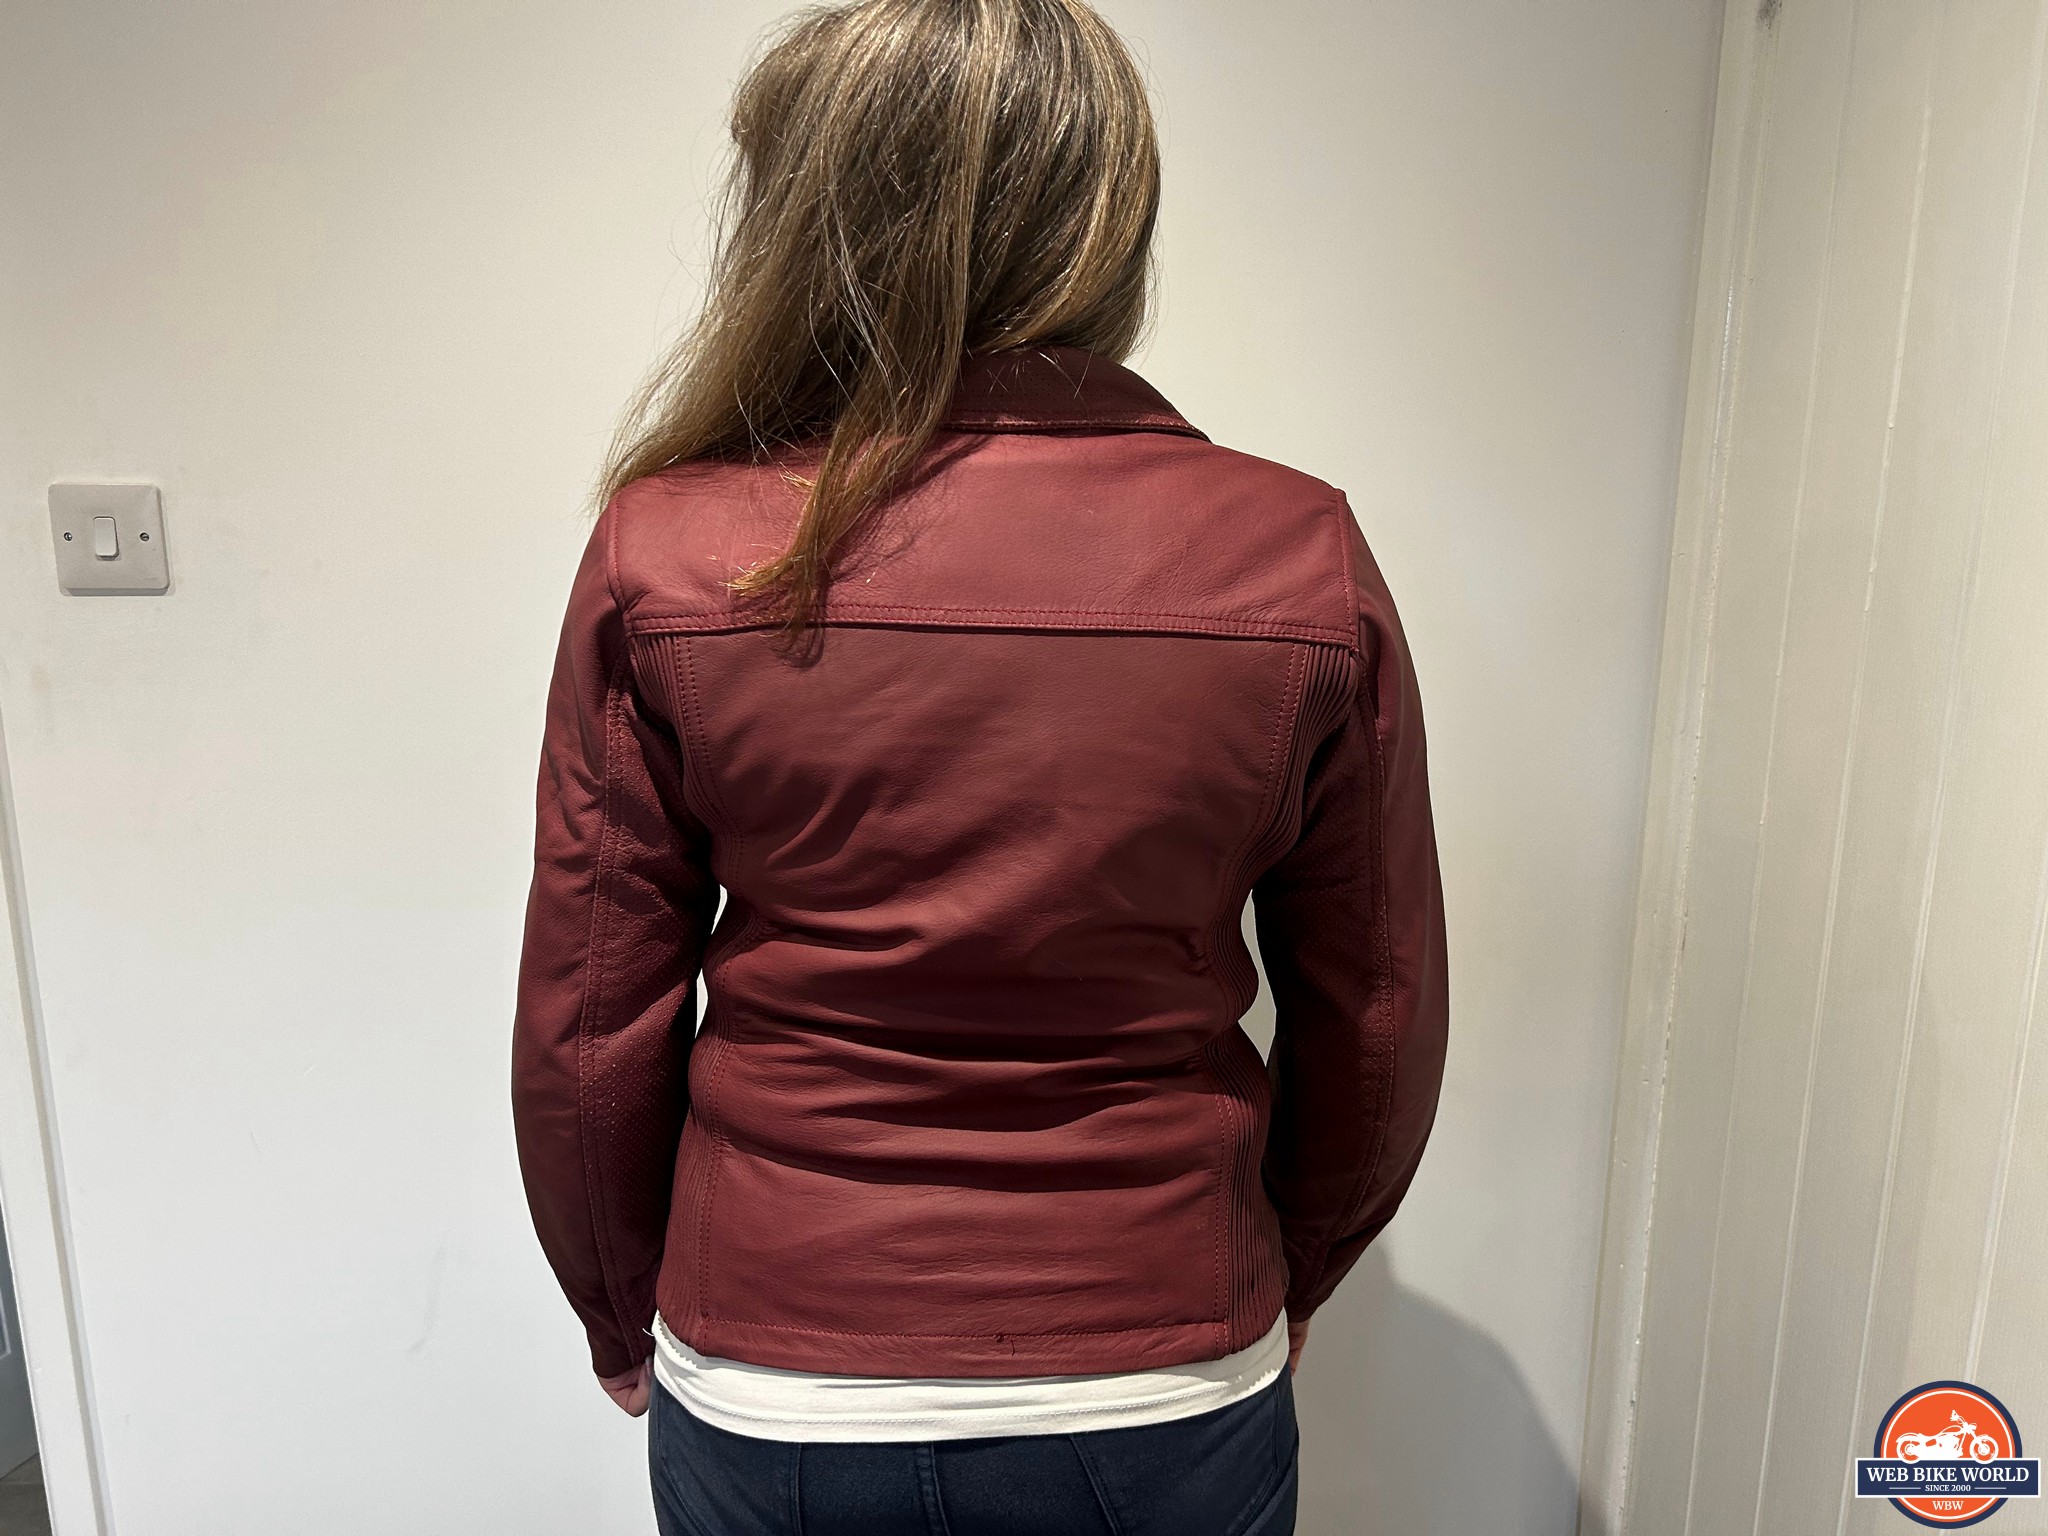 Rear view of the RSD Seventy4 Atherton jacket